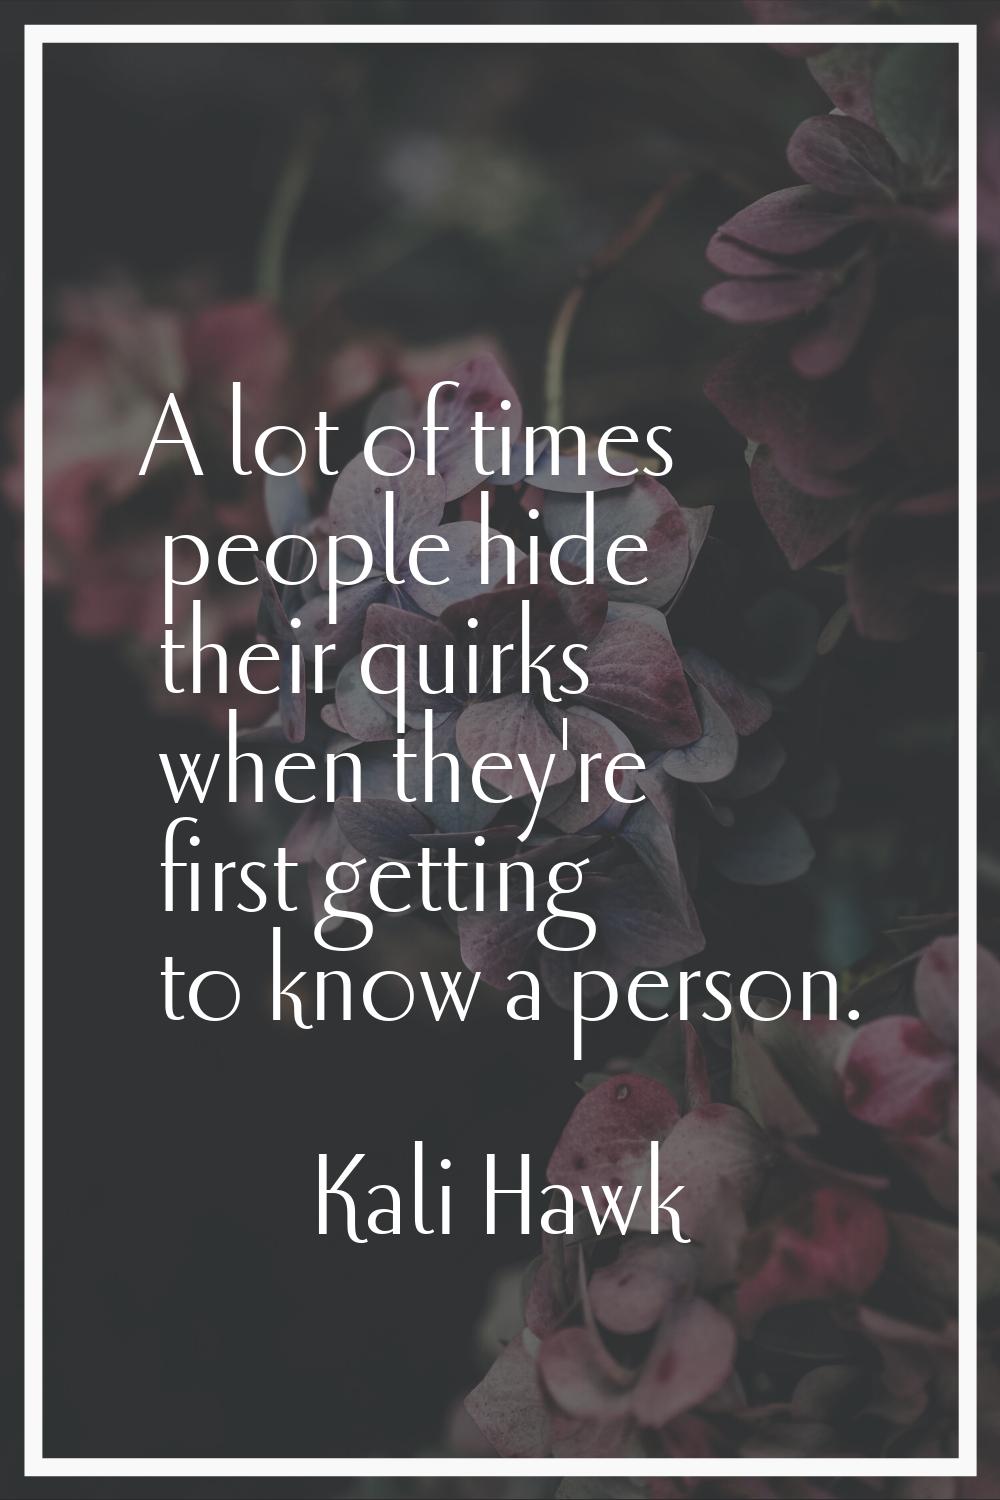 A lot of times people hide their quirks when they're first getting to know a person.